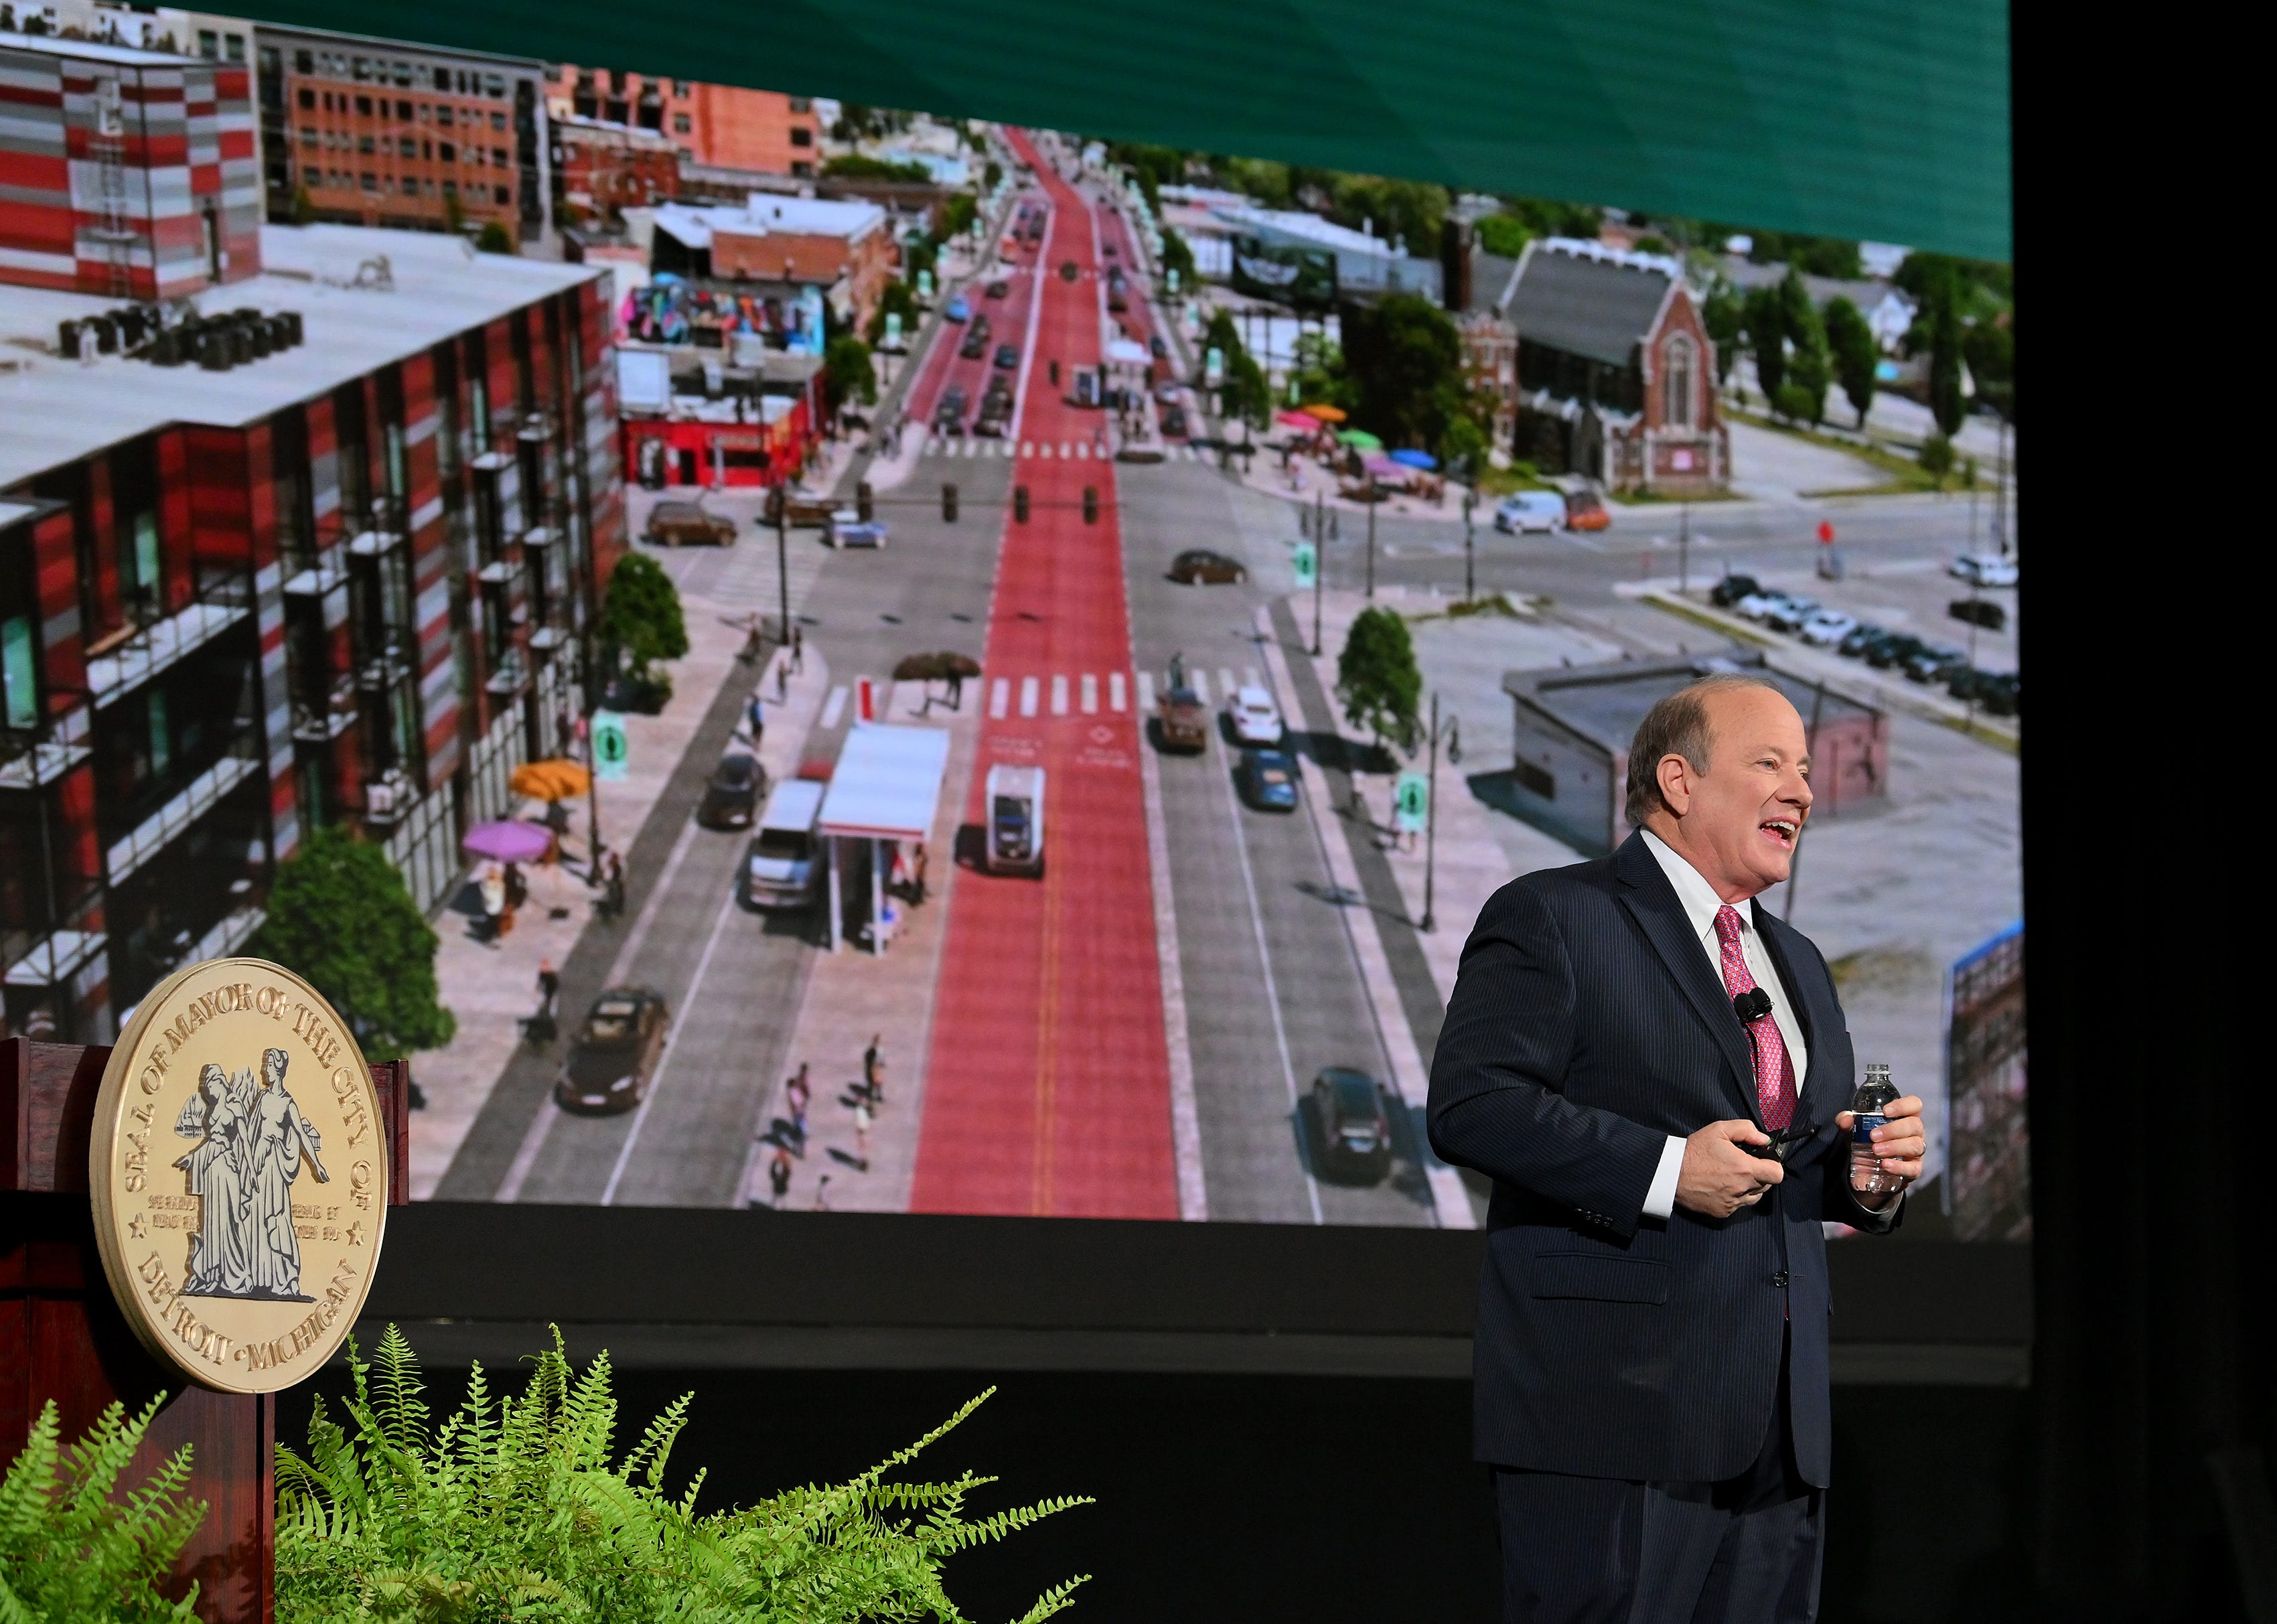 5 takeaways from Duggan's 2023 State of the City address